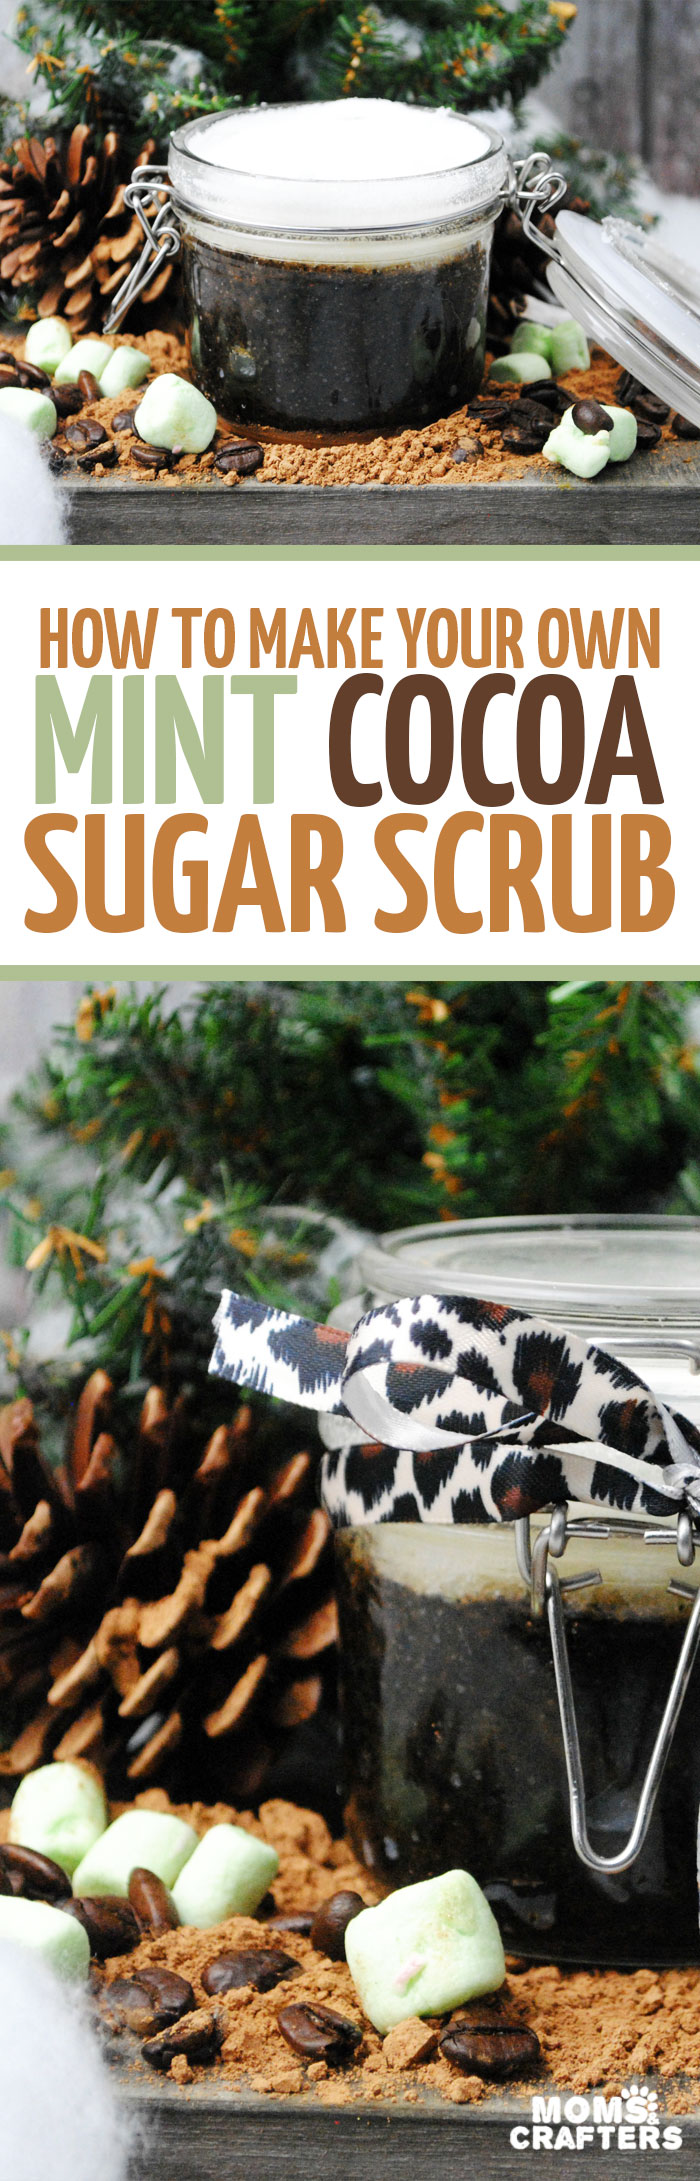 DIY scrubs and beauty products make great homemade gift ideas! This mint cocoa sugar scrub recipe is easy to prepare in large batches and a wonderful way to make your own presents. 